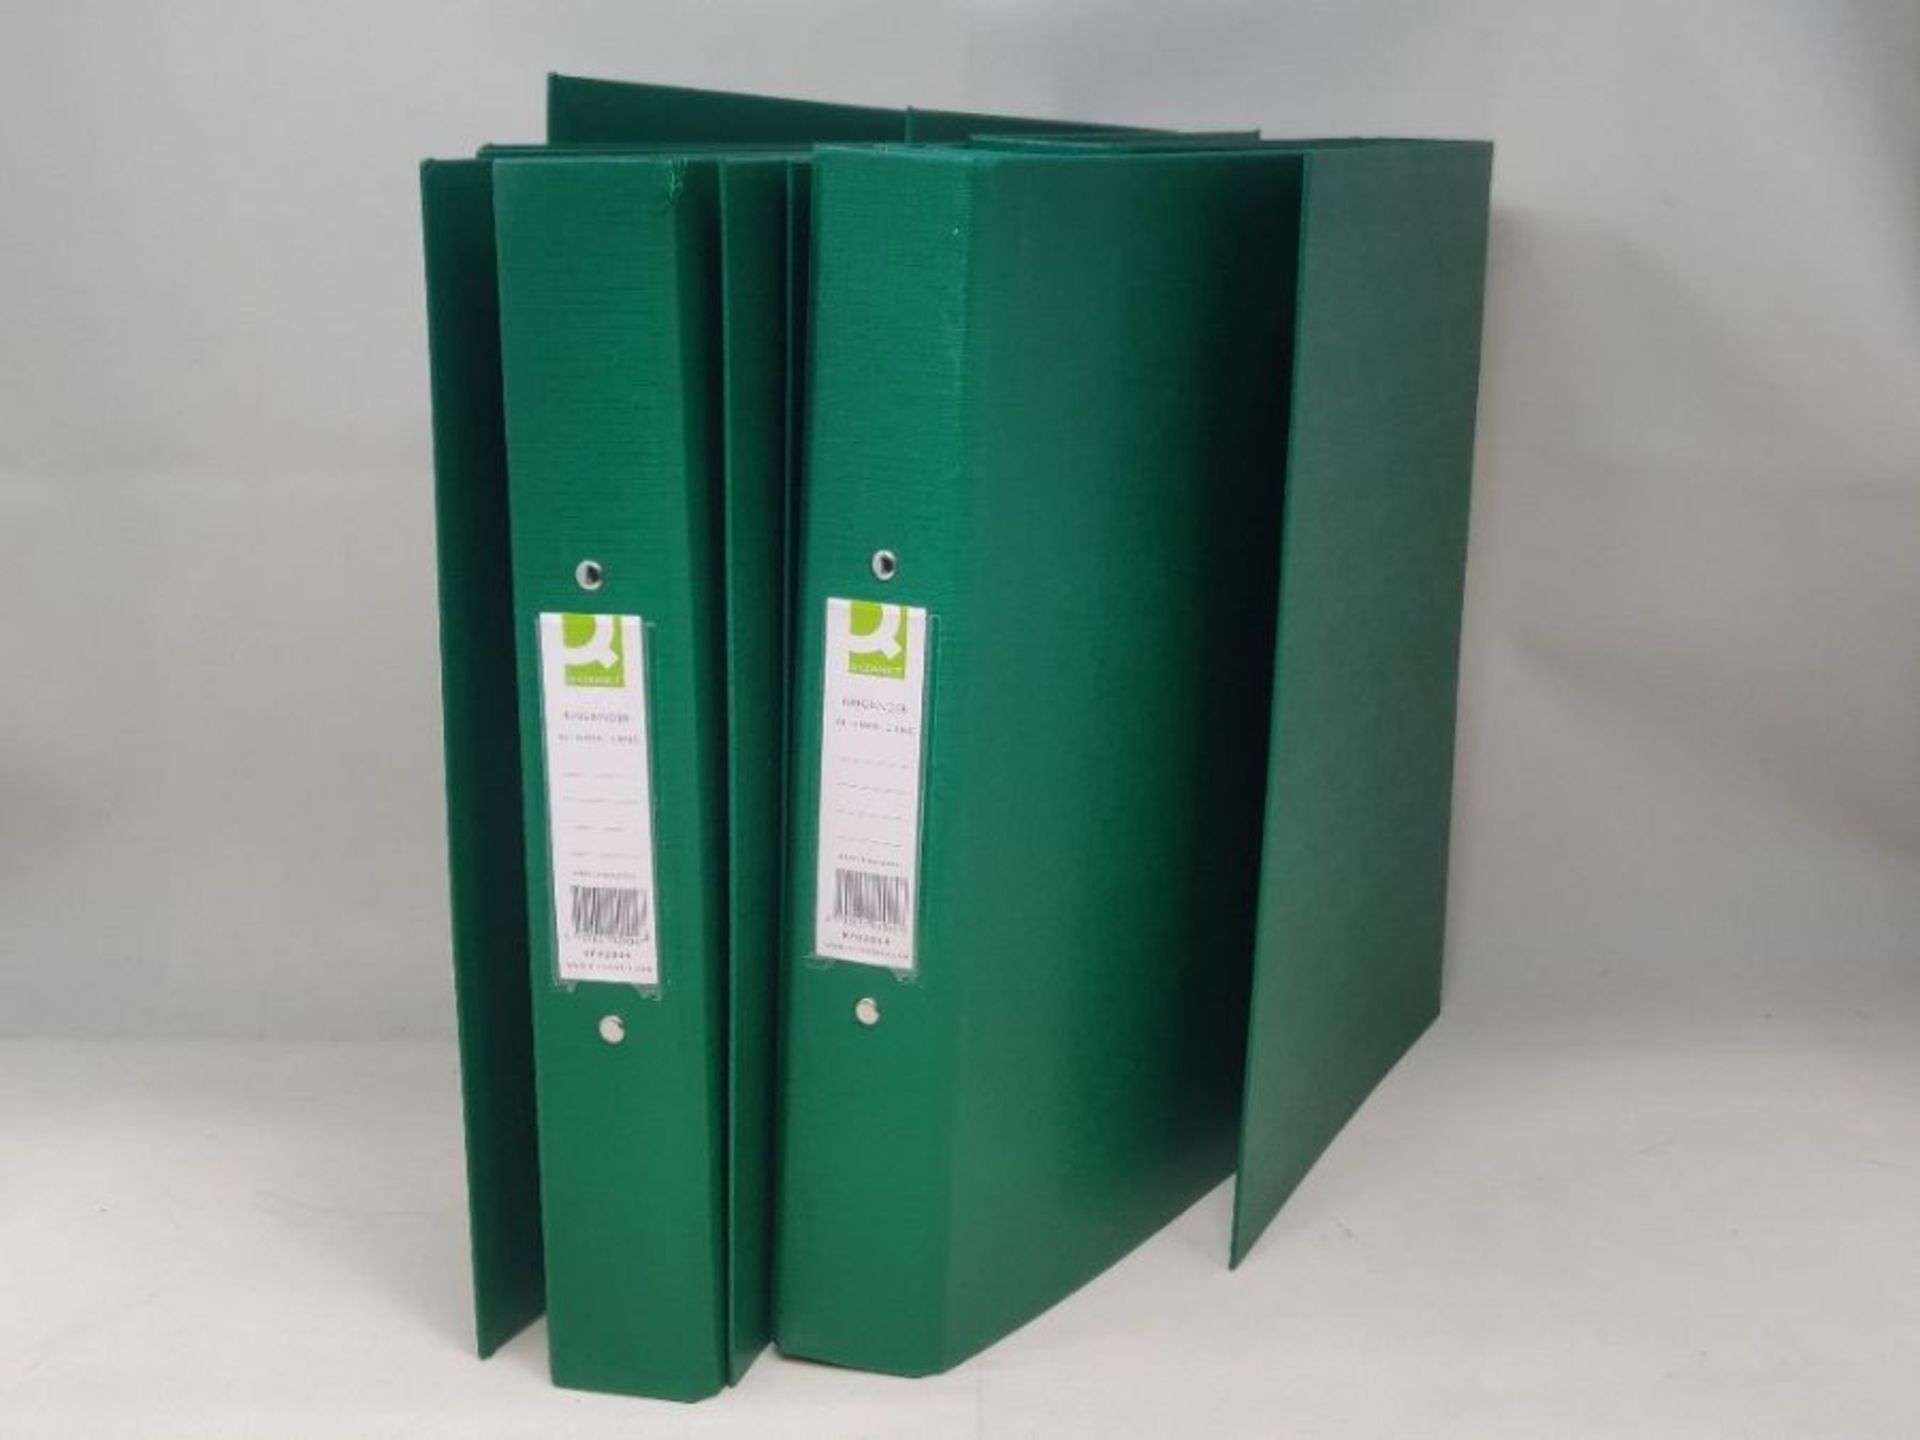 Q-Connect 2 Ring Polypropylene A4 Binder, 25 mm KF02004 - Green, Pack of 10 - Image 2 of 4